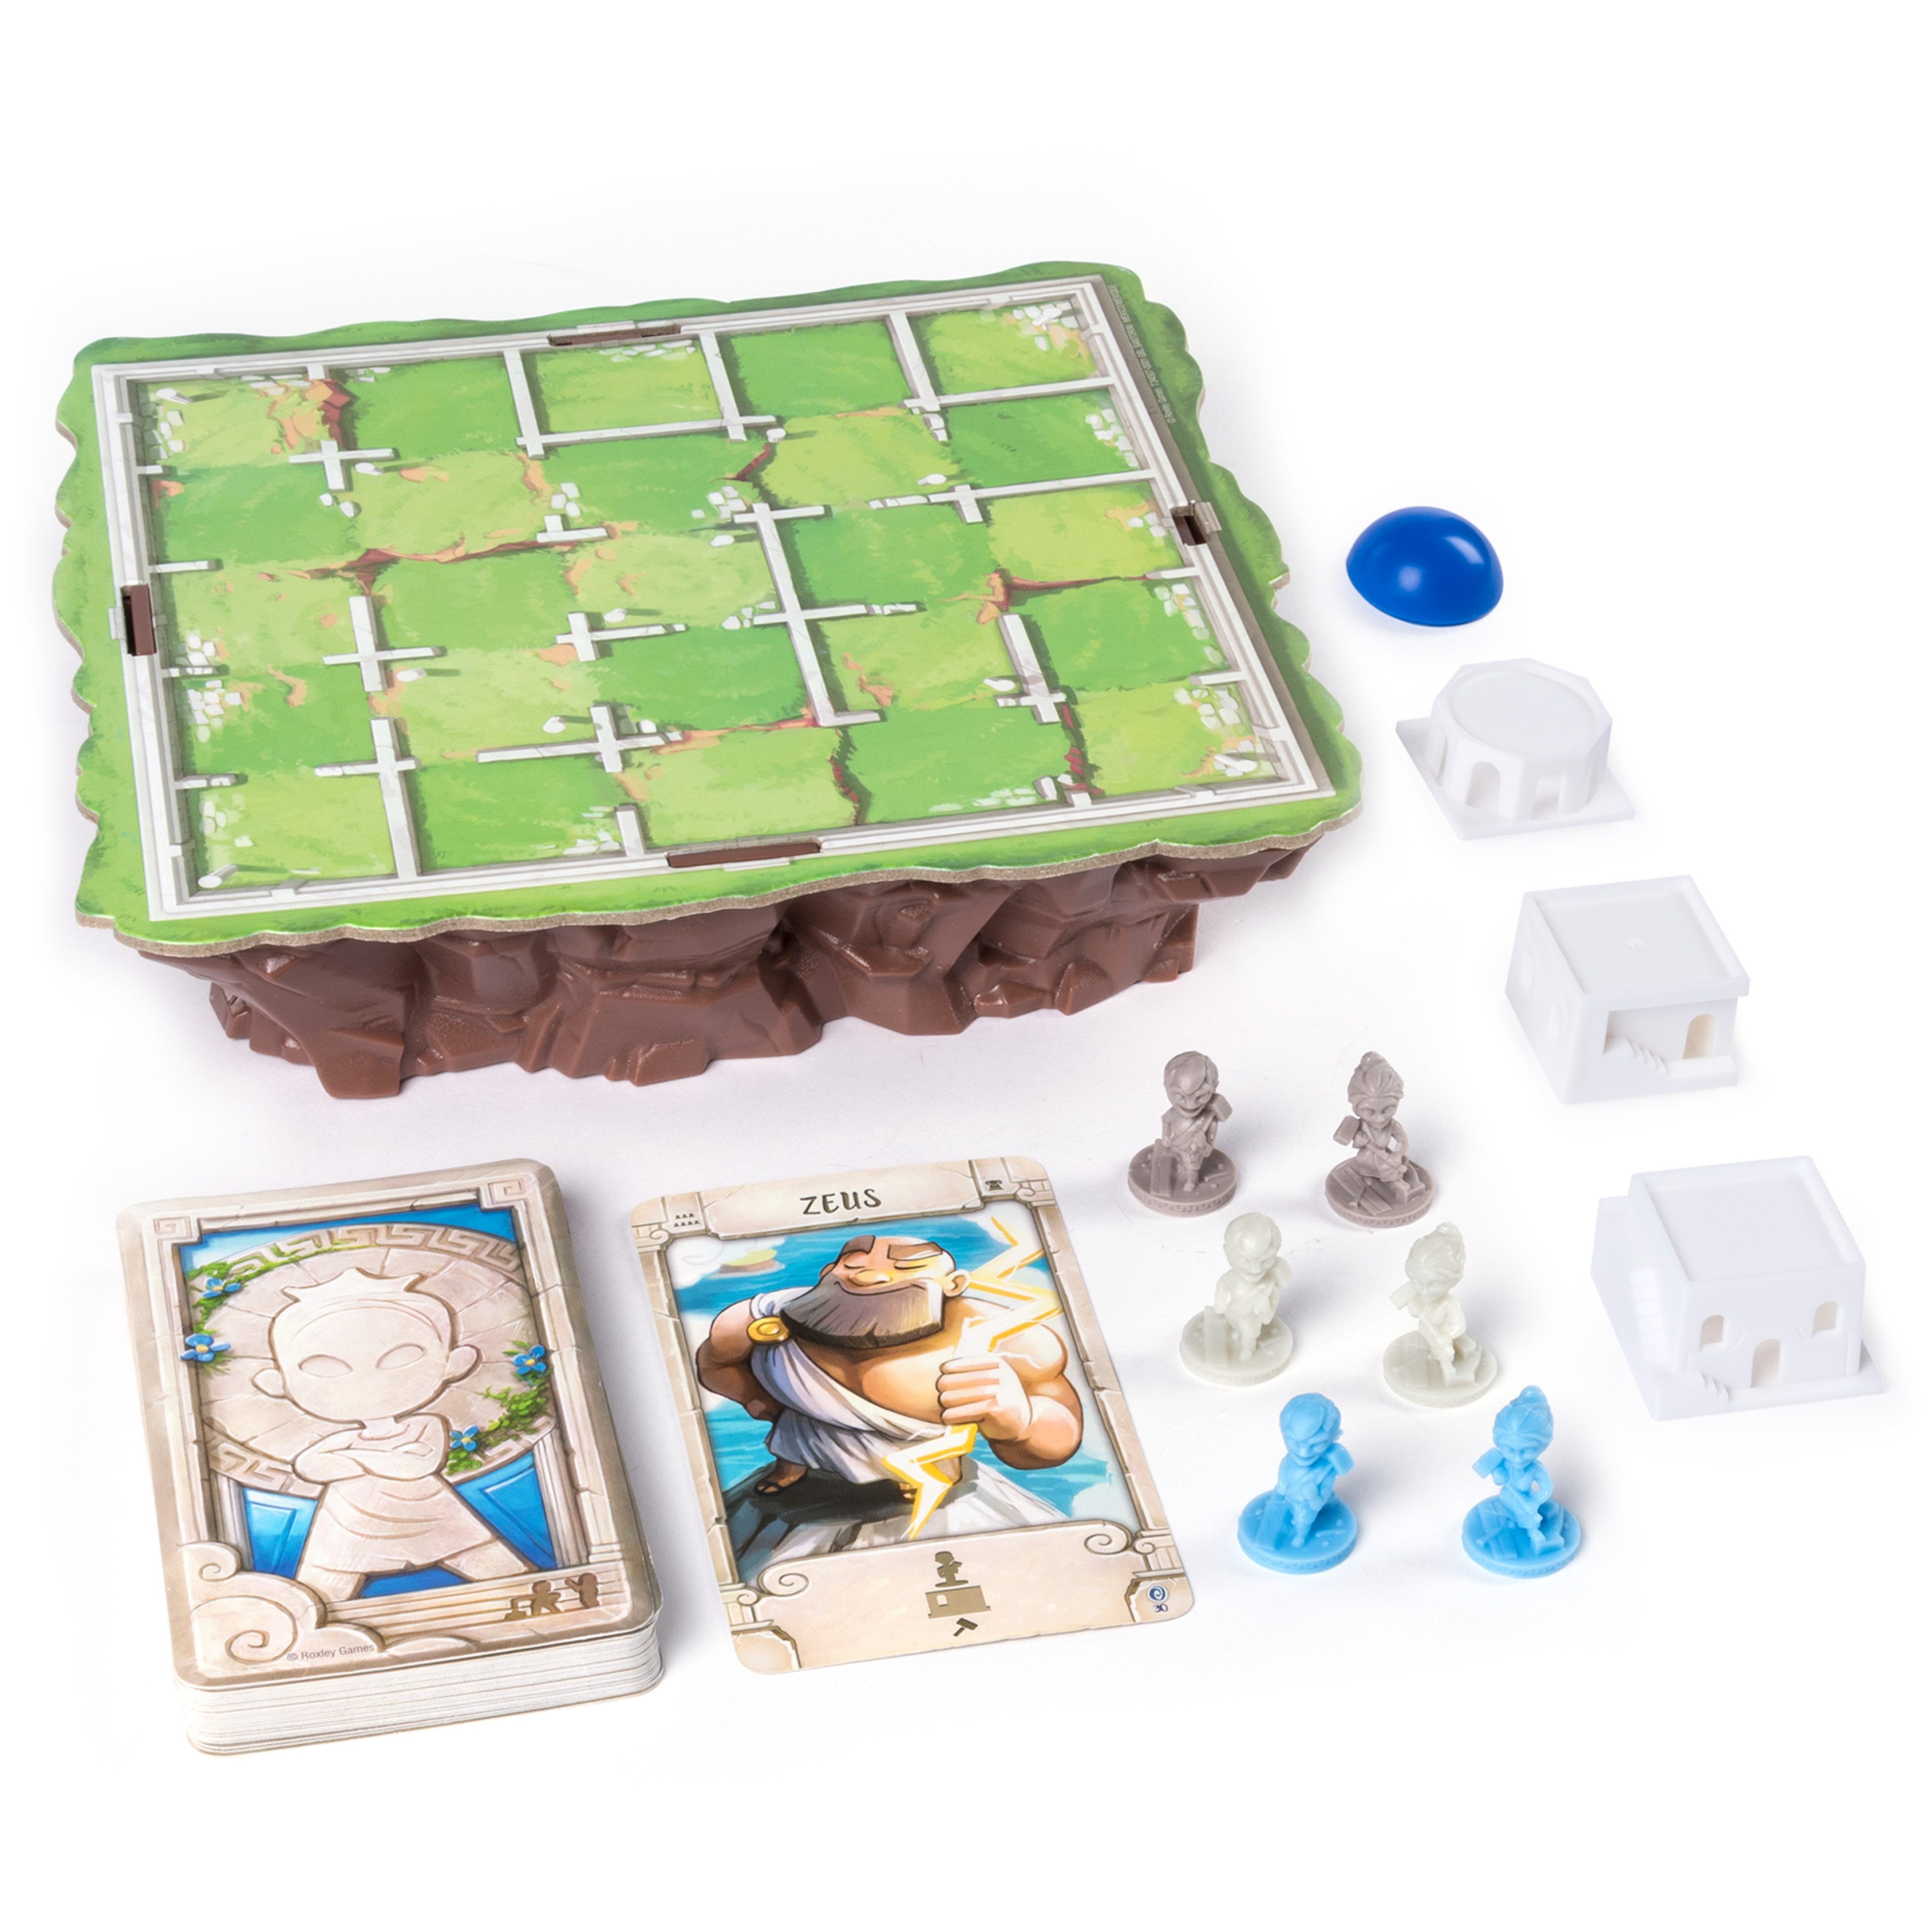 Santorini, Strategy Family Board Game 2-4 Players Classic Fun Building Greek Mythology Card Game, for Kids & Adults Ages 8 and up - image 4 of 6